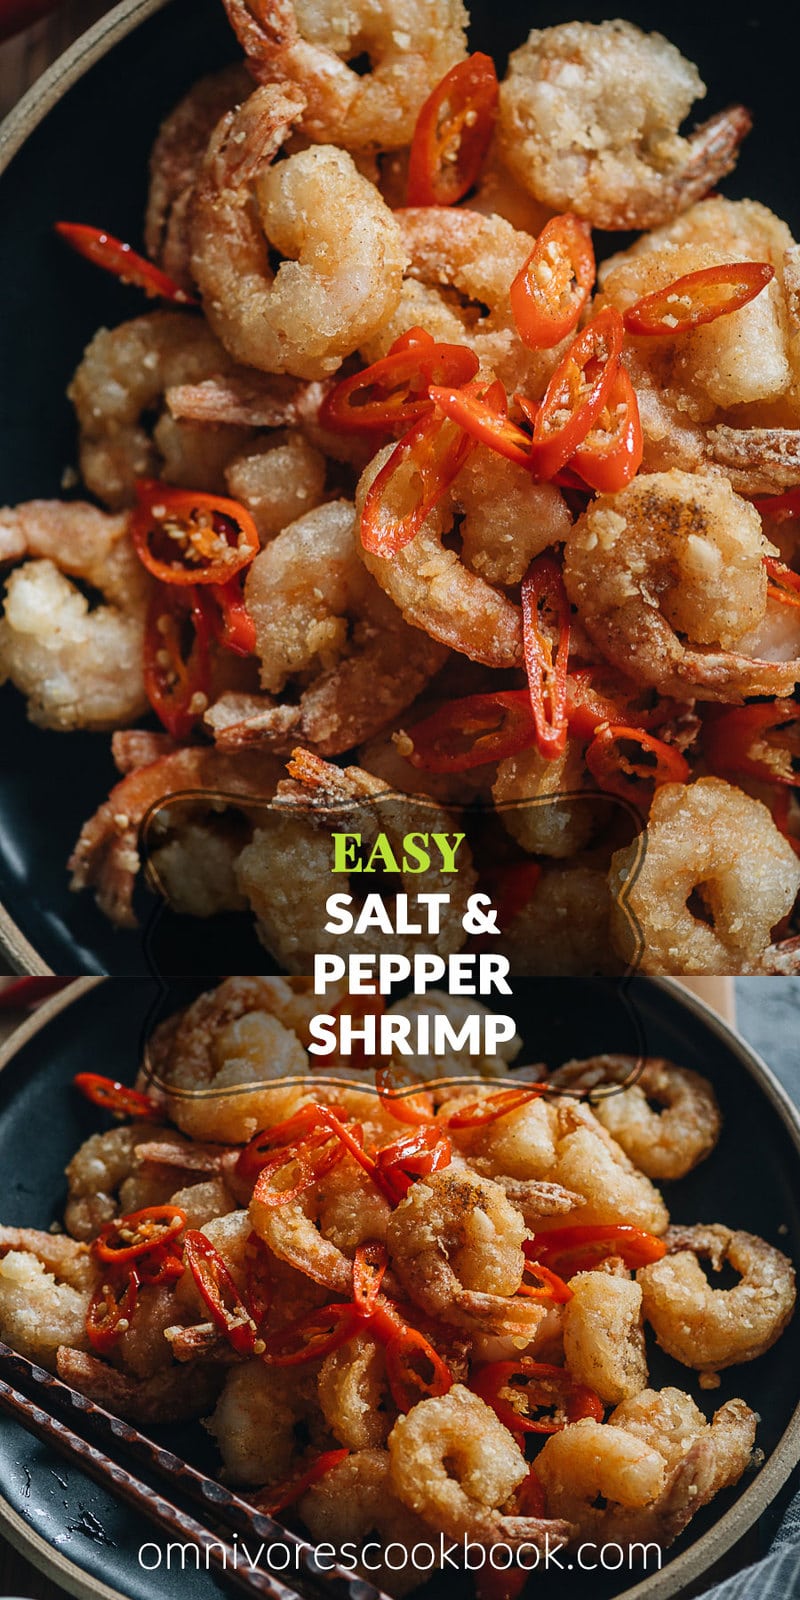 Salt and Pepper Shrimp (椒盐虾) | This recipe is perfect for you if you’re looking for an easy appetizer. The juicy shrimp are coated with a crunchy crispy coating and tossed in a garlicky salt and pepper mixture, creating a delicious dish no one can refuse. {Gluten-Free}